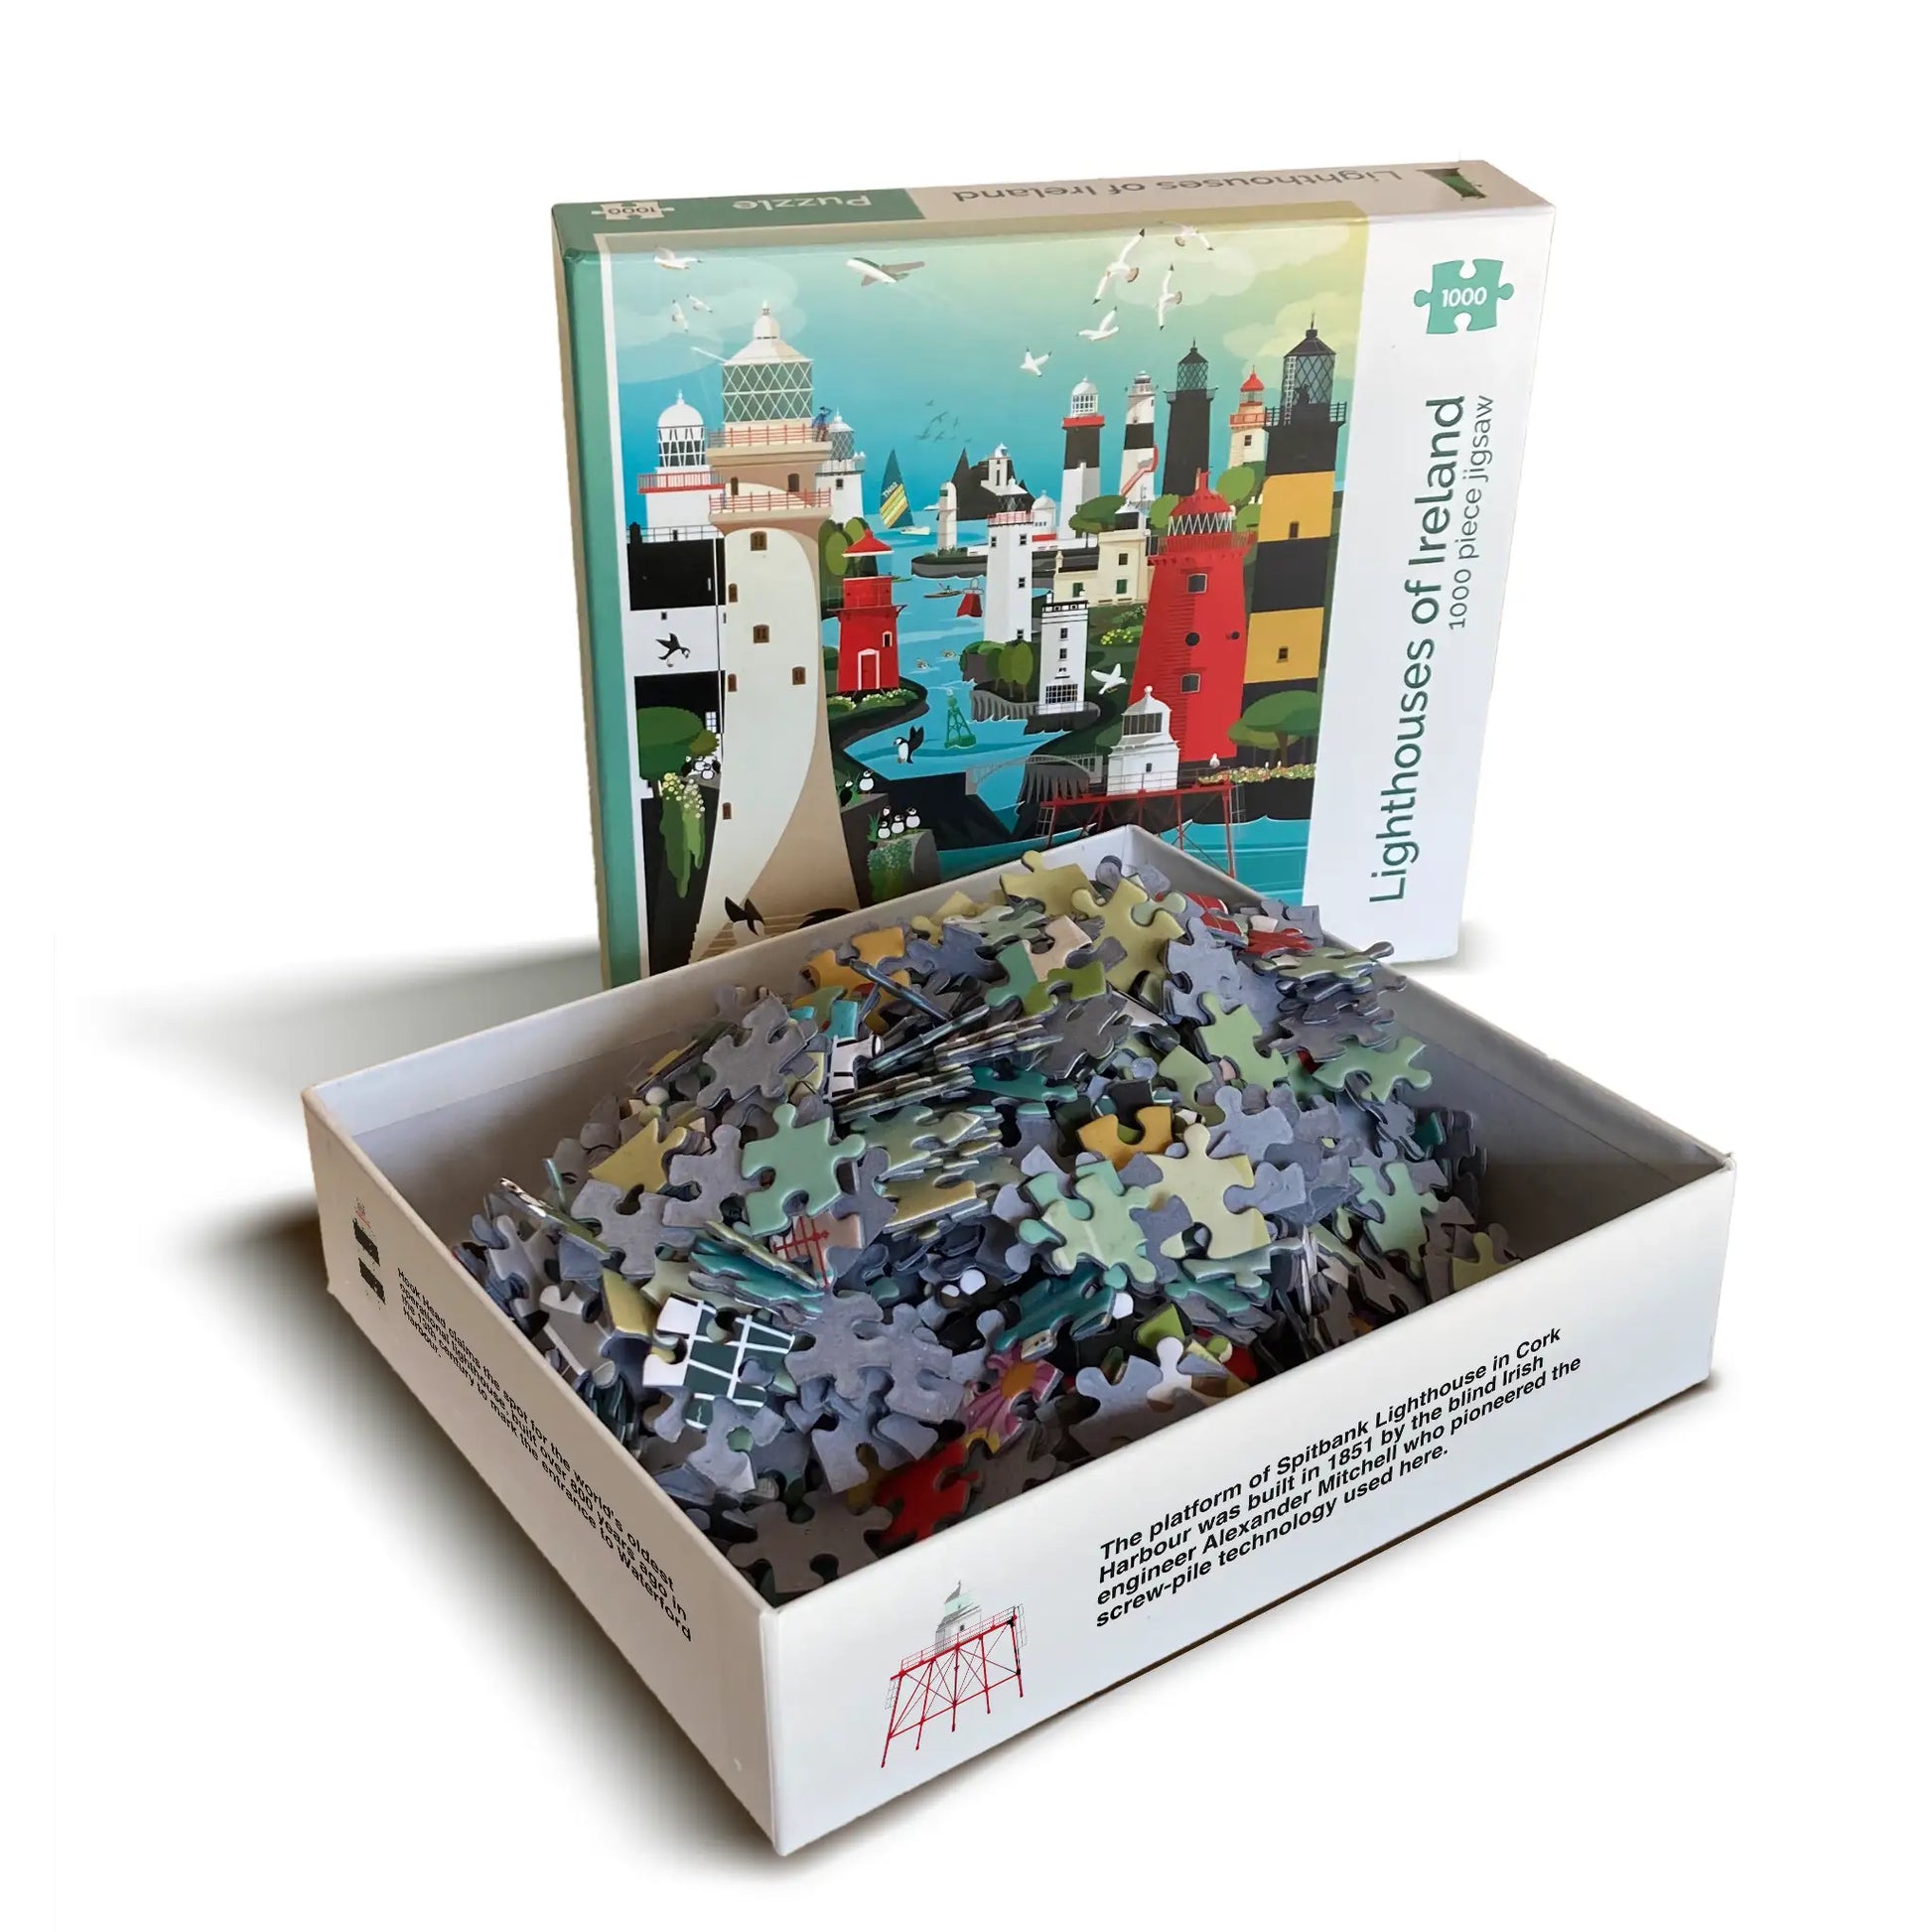 Jigsaw puzzle, lighthouses of Ireland, open box with puzzle pieces visible